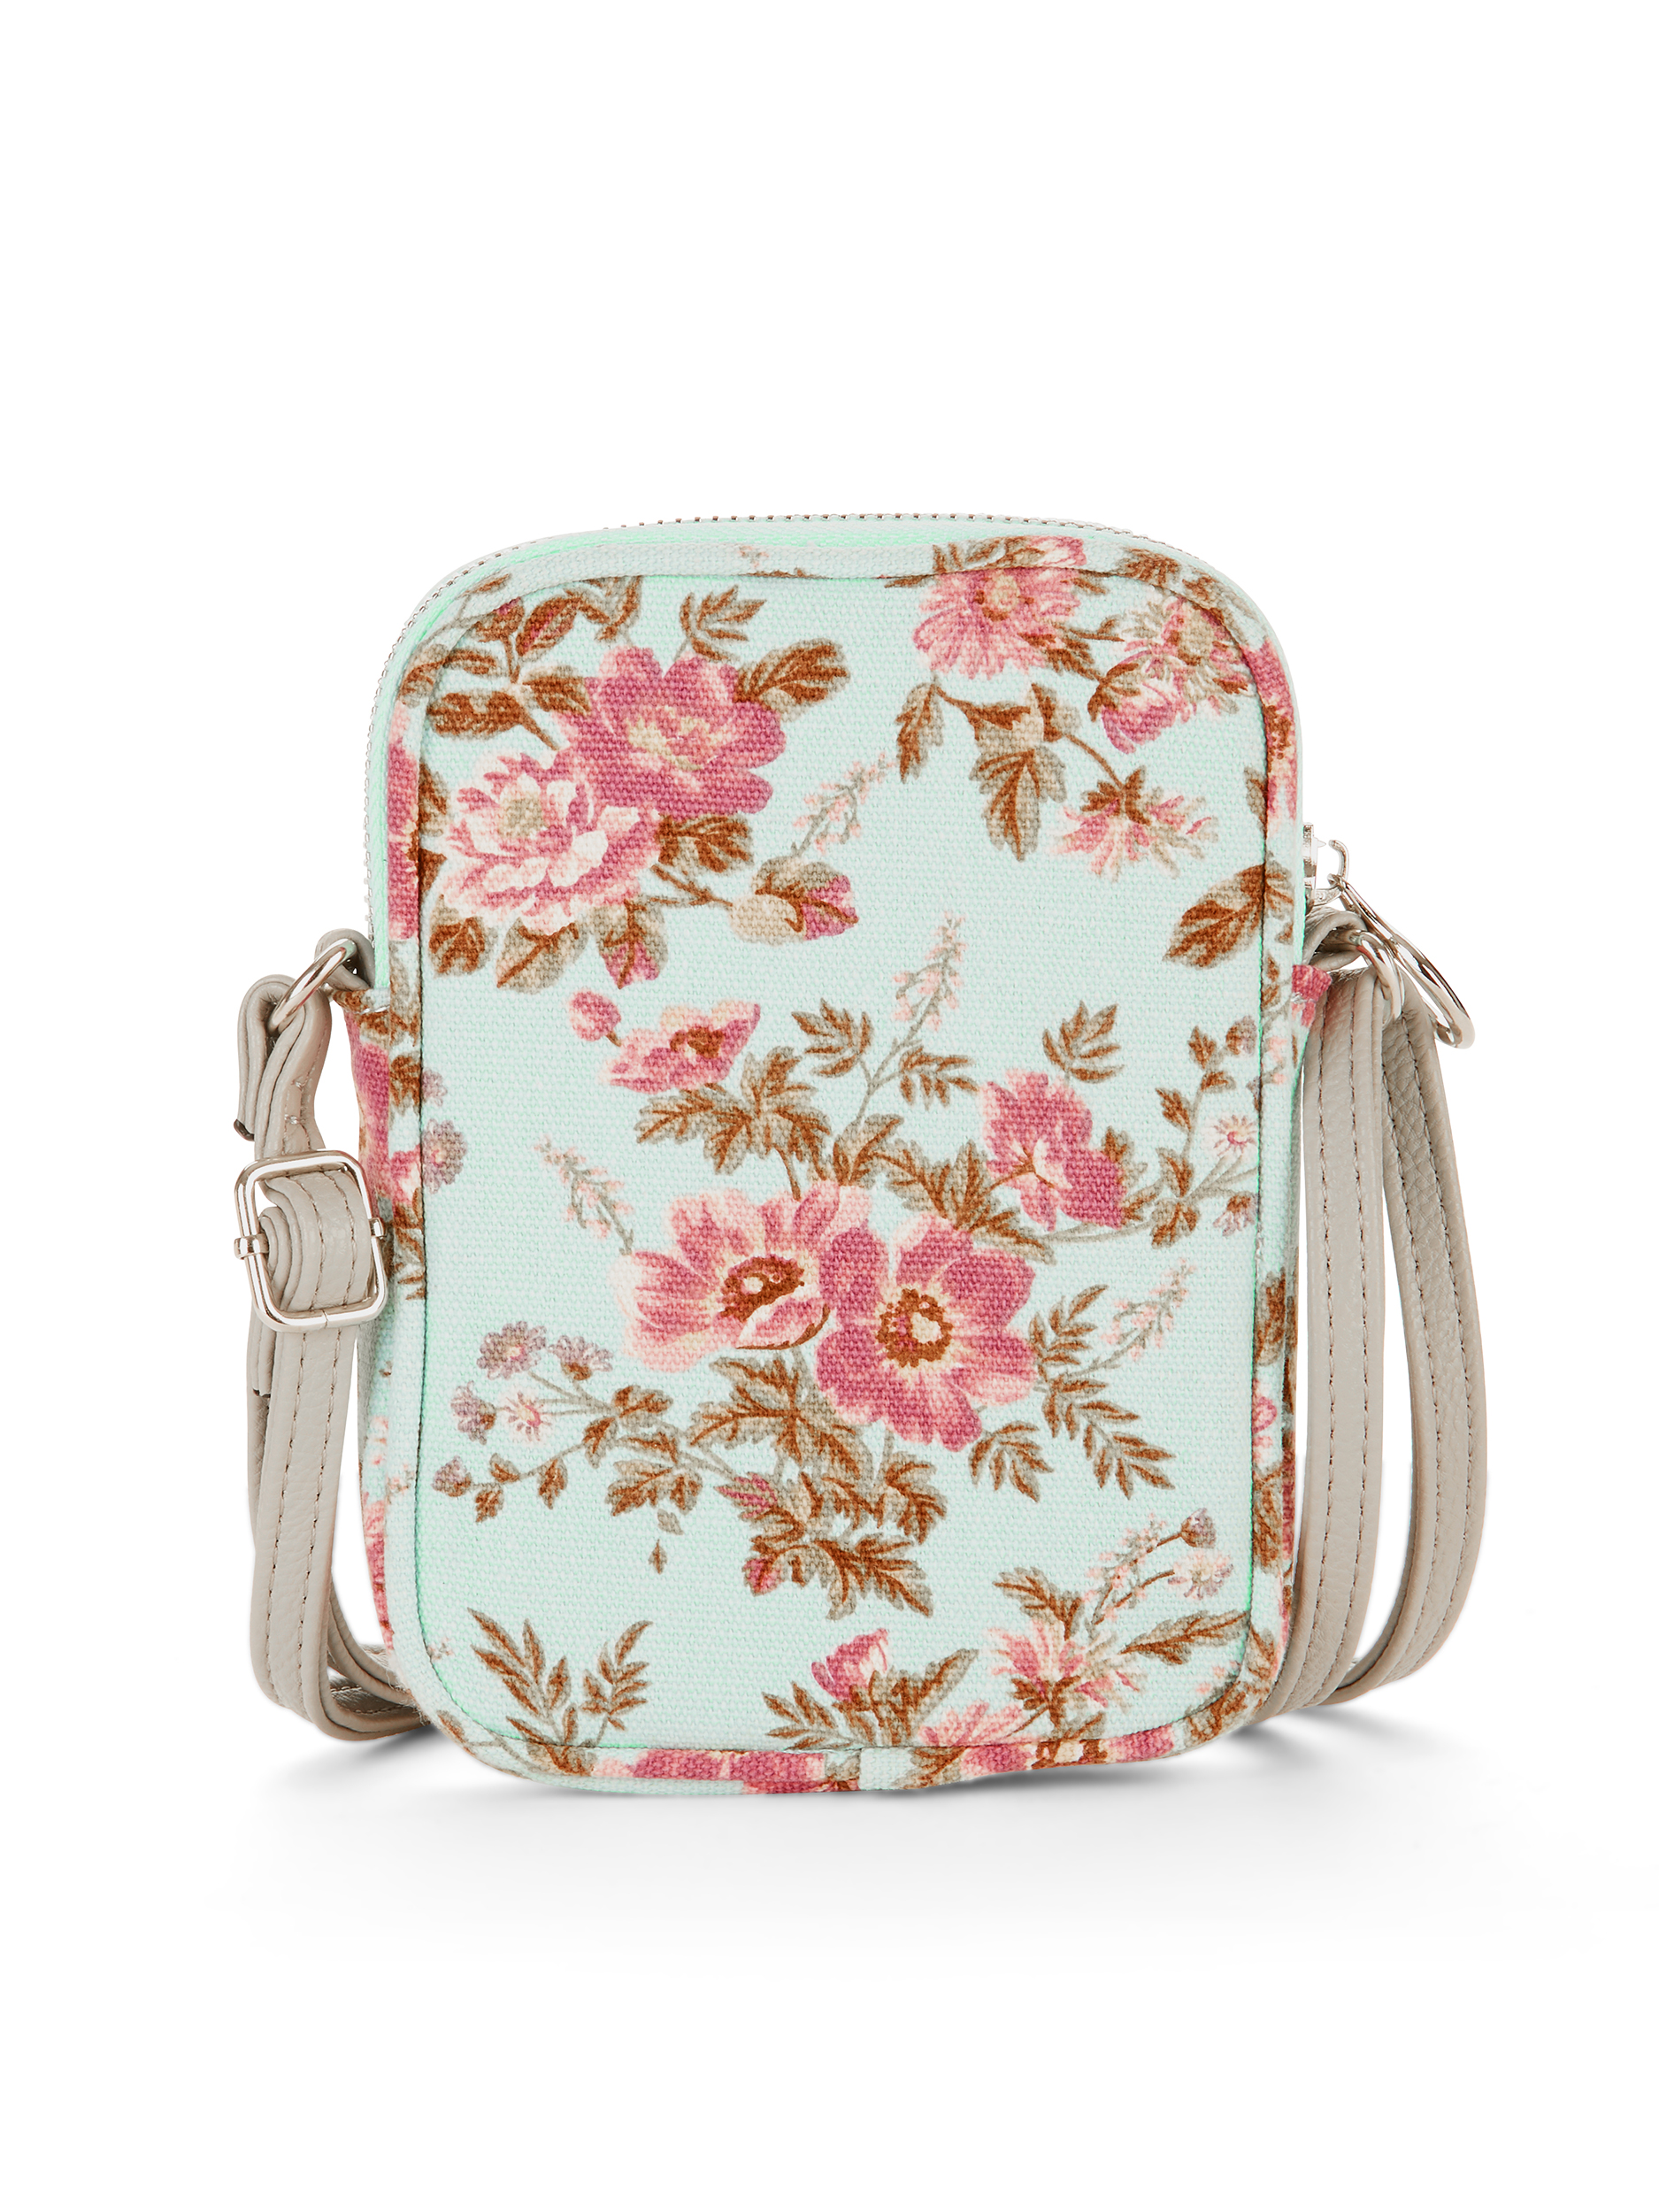 No Boundaries Mint Floral Cell Phone Crossbody - image 2 of 3